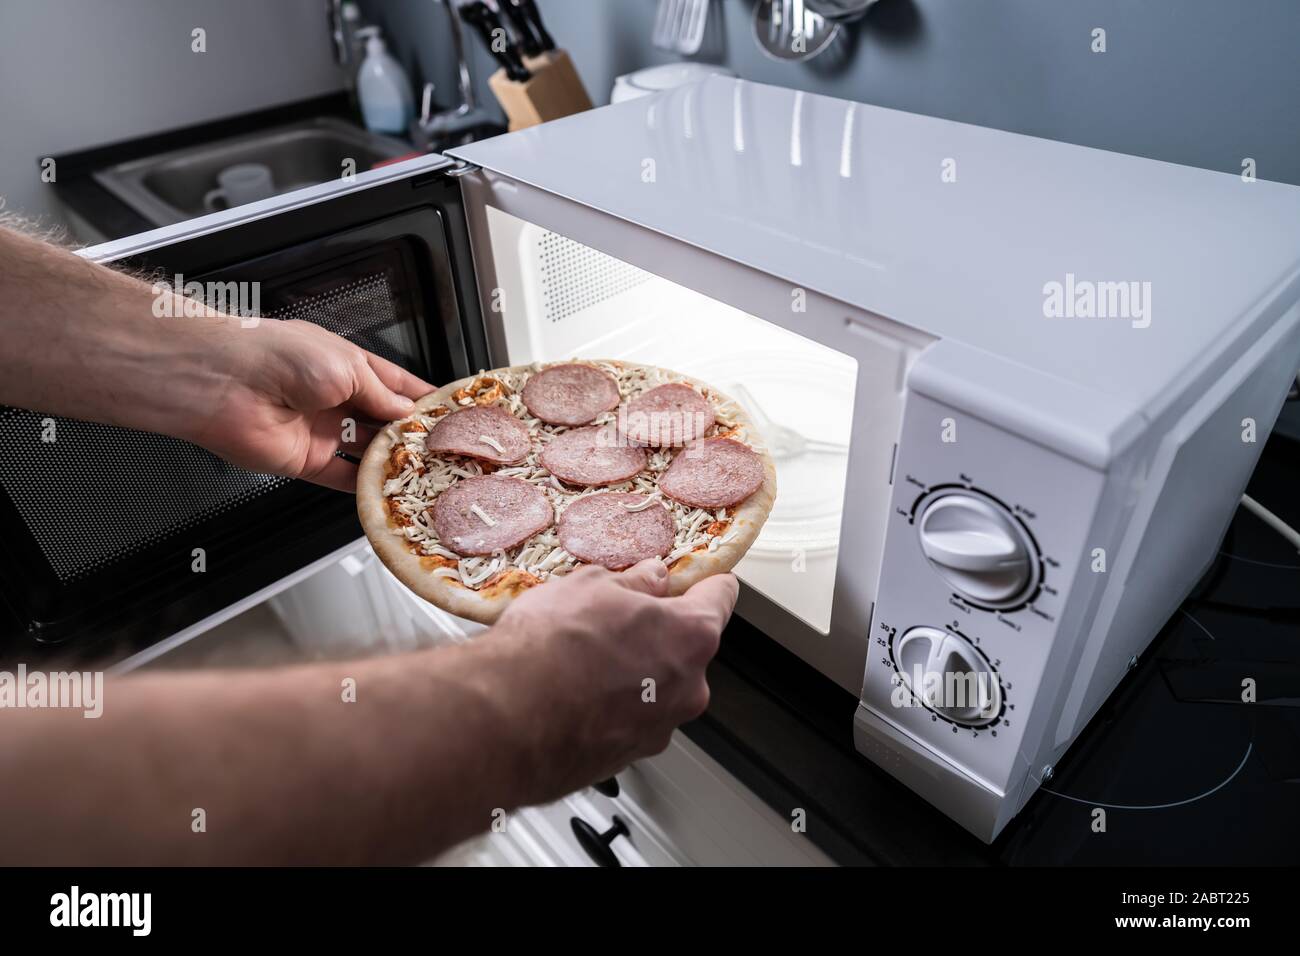 Human Hand Baking Pizza In Microwave Oven Stock Photo